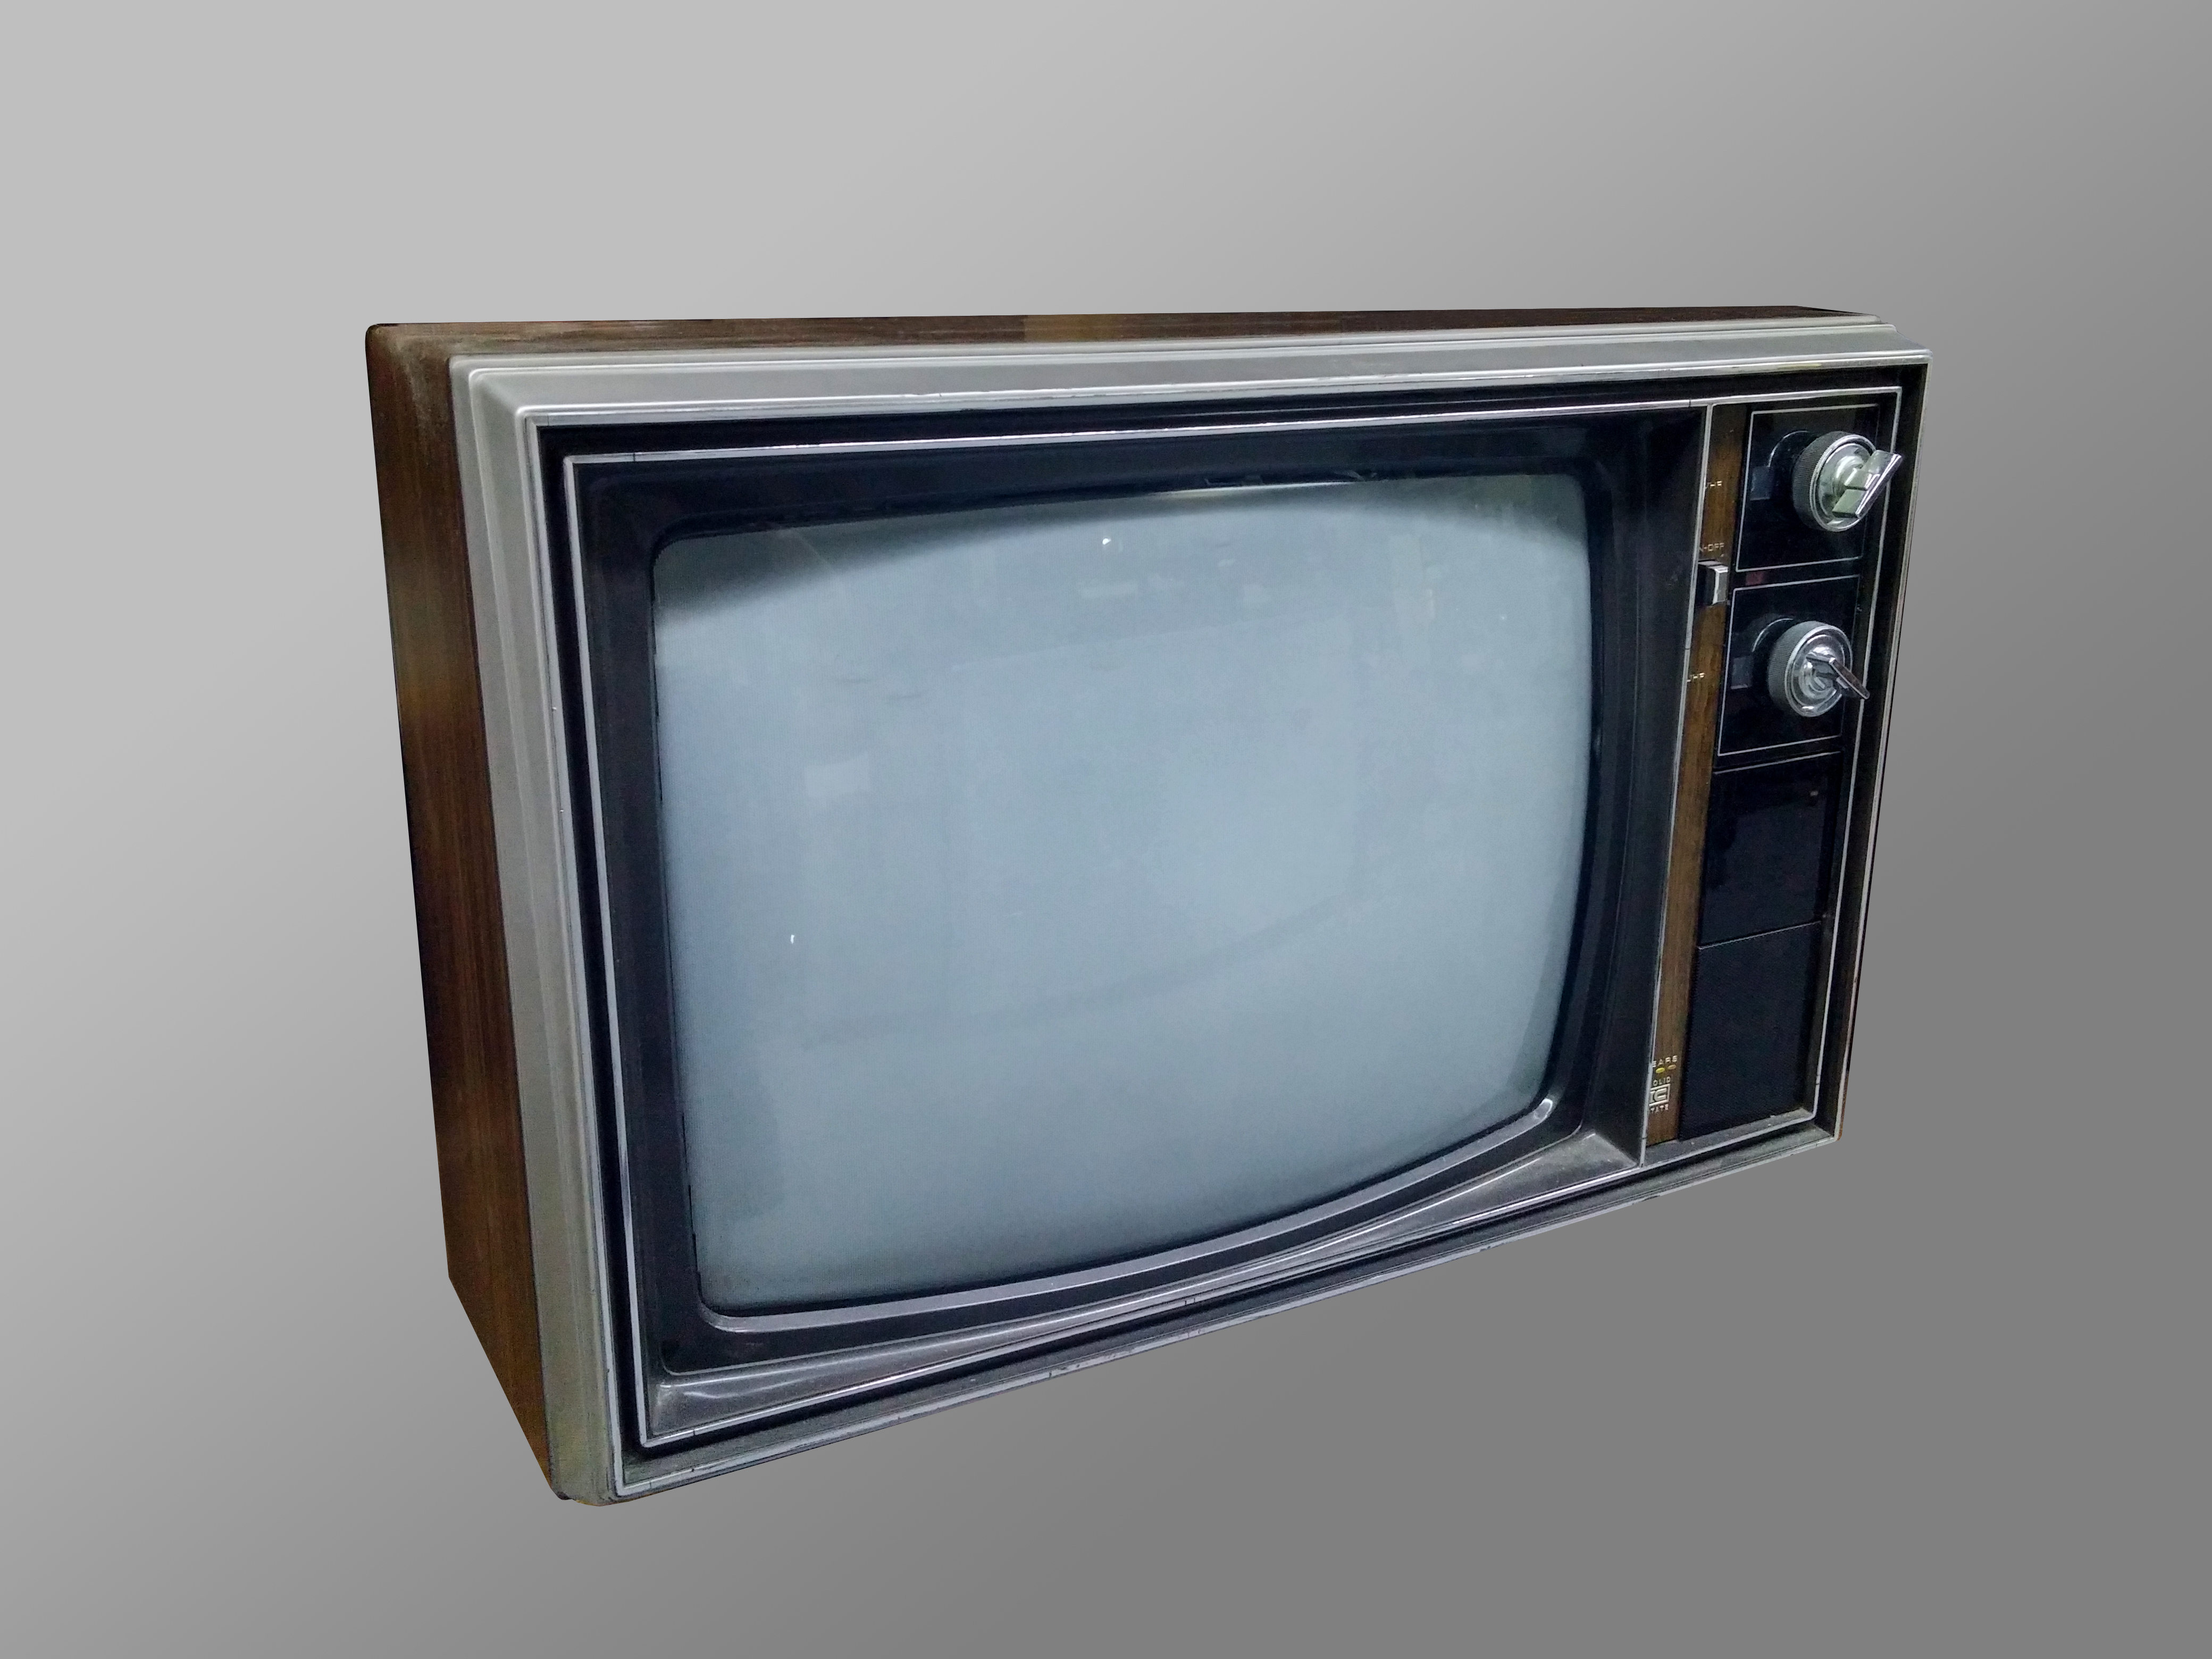 Sears T4154  17″ Television